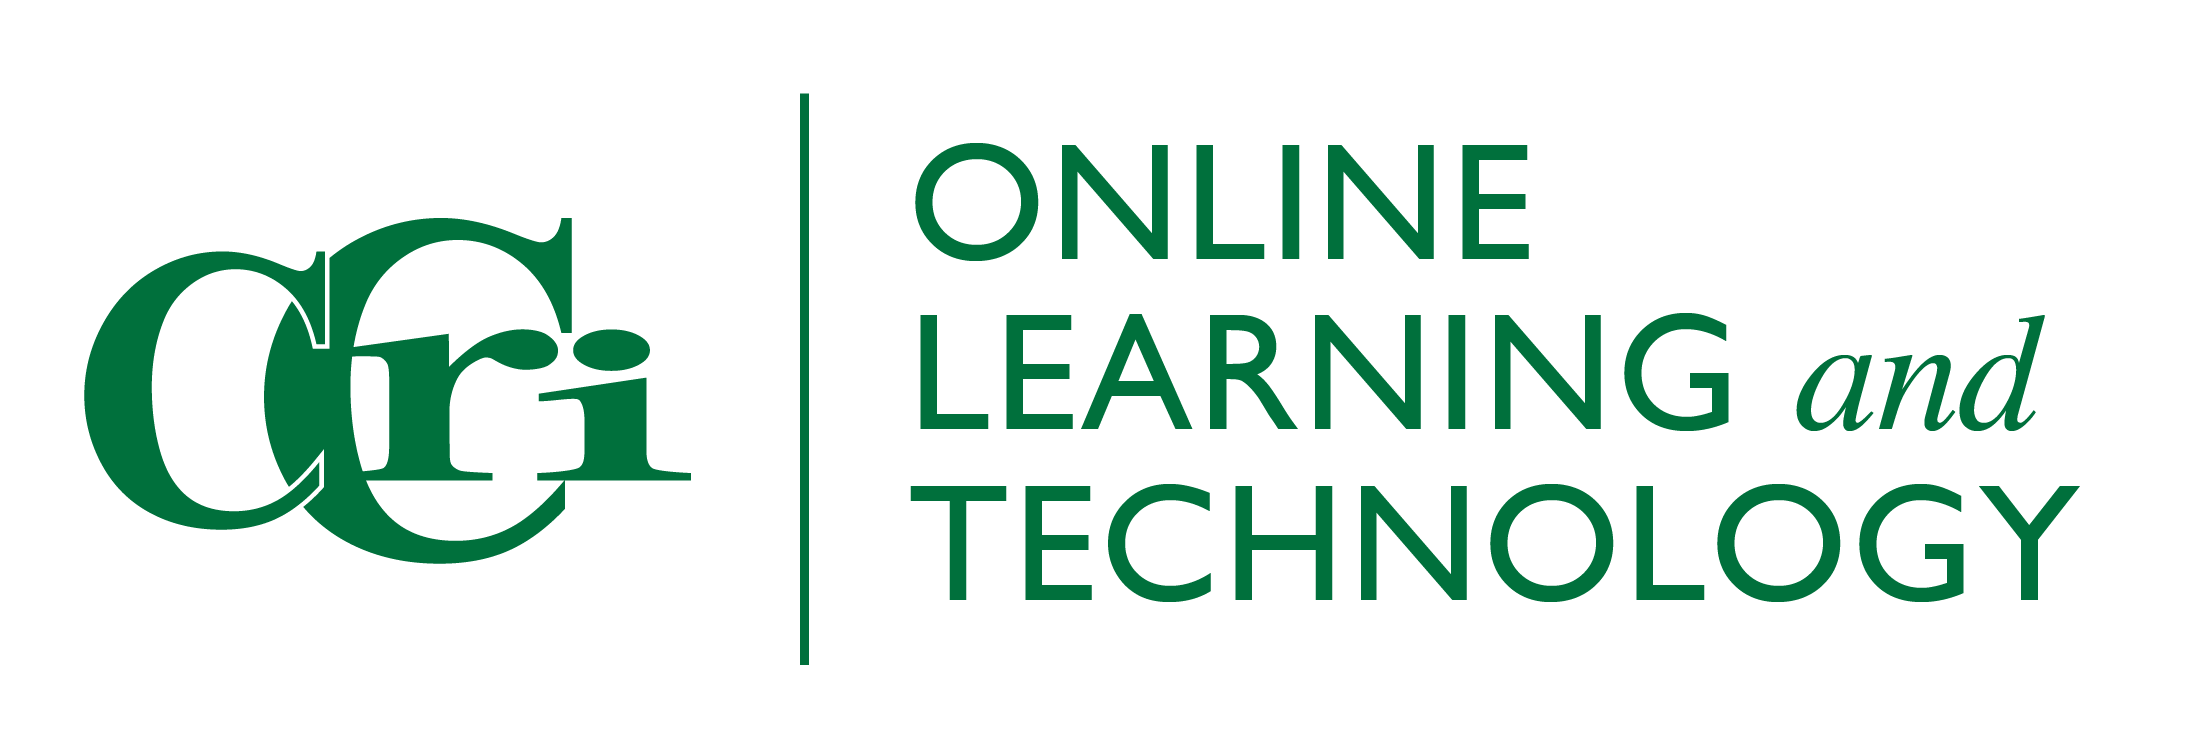 Online Learning and Technology